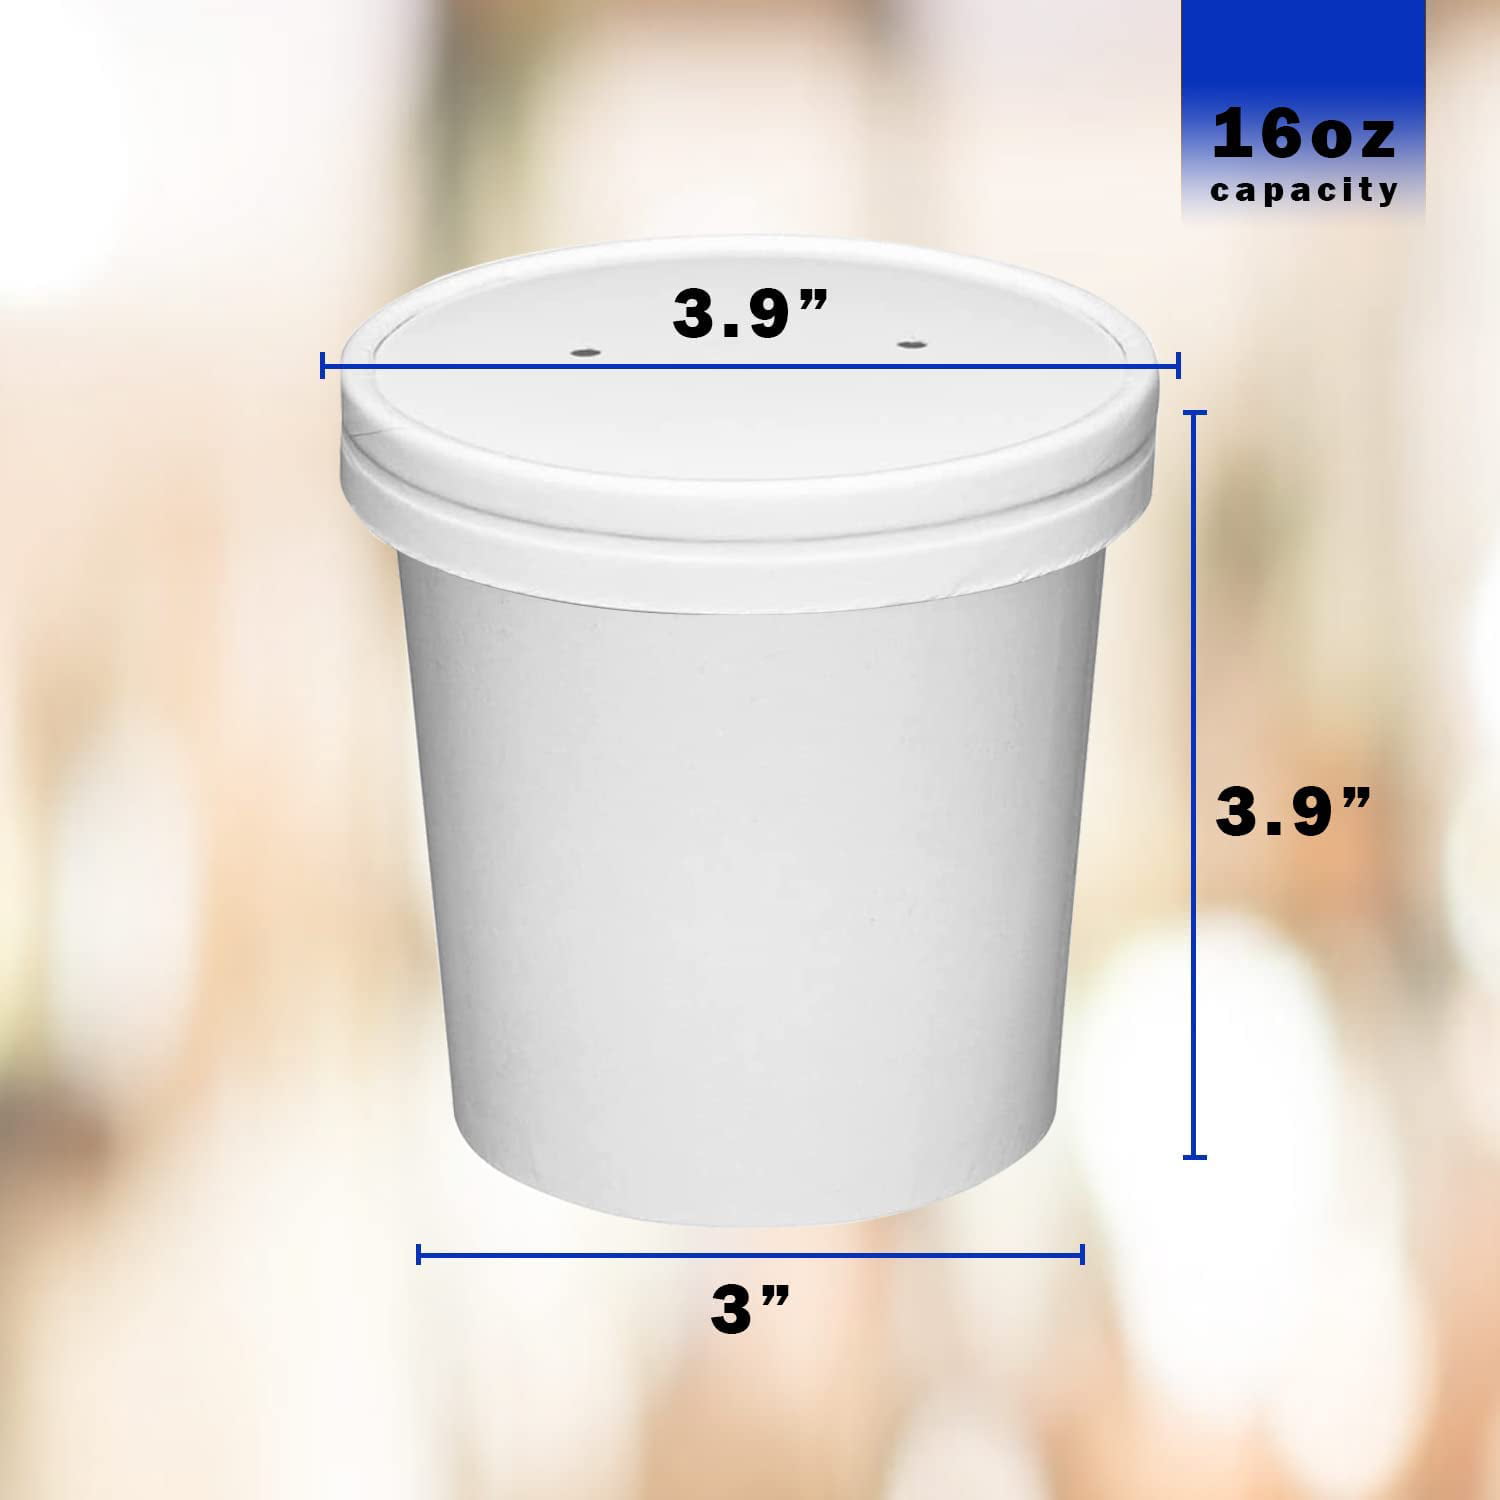 Fiesta Compostable Takeaway Soup Containers 340ml (Pack of 500) - FB162 -  Buy Online at Nisbets